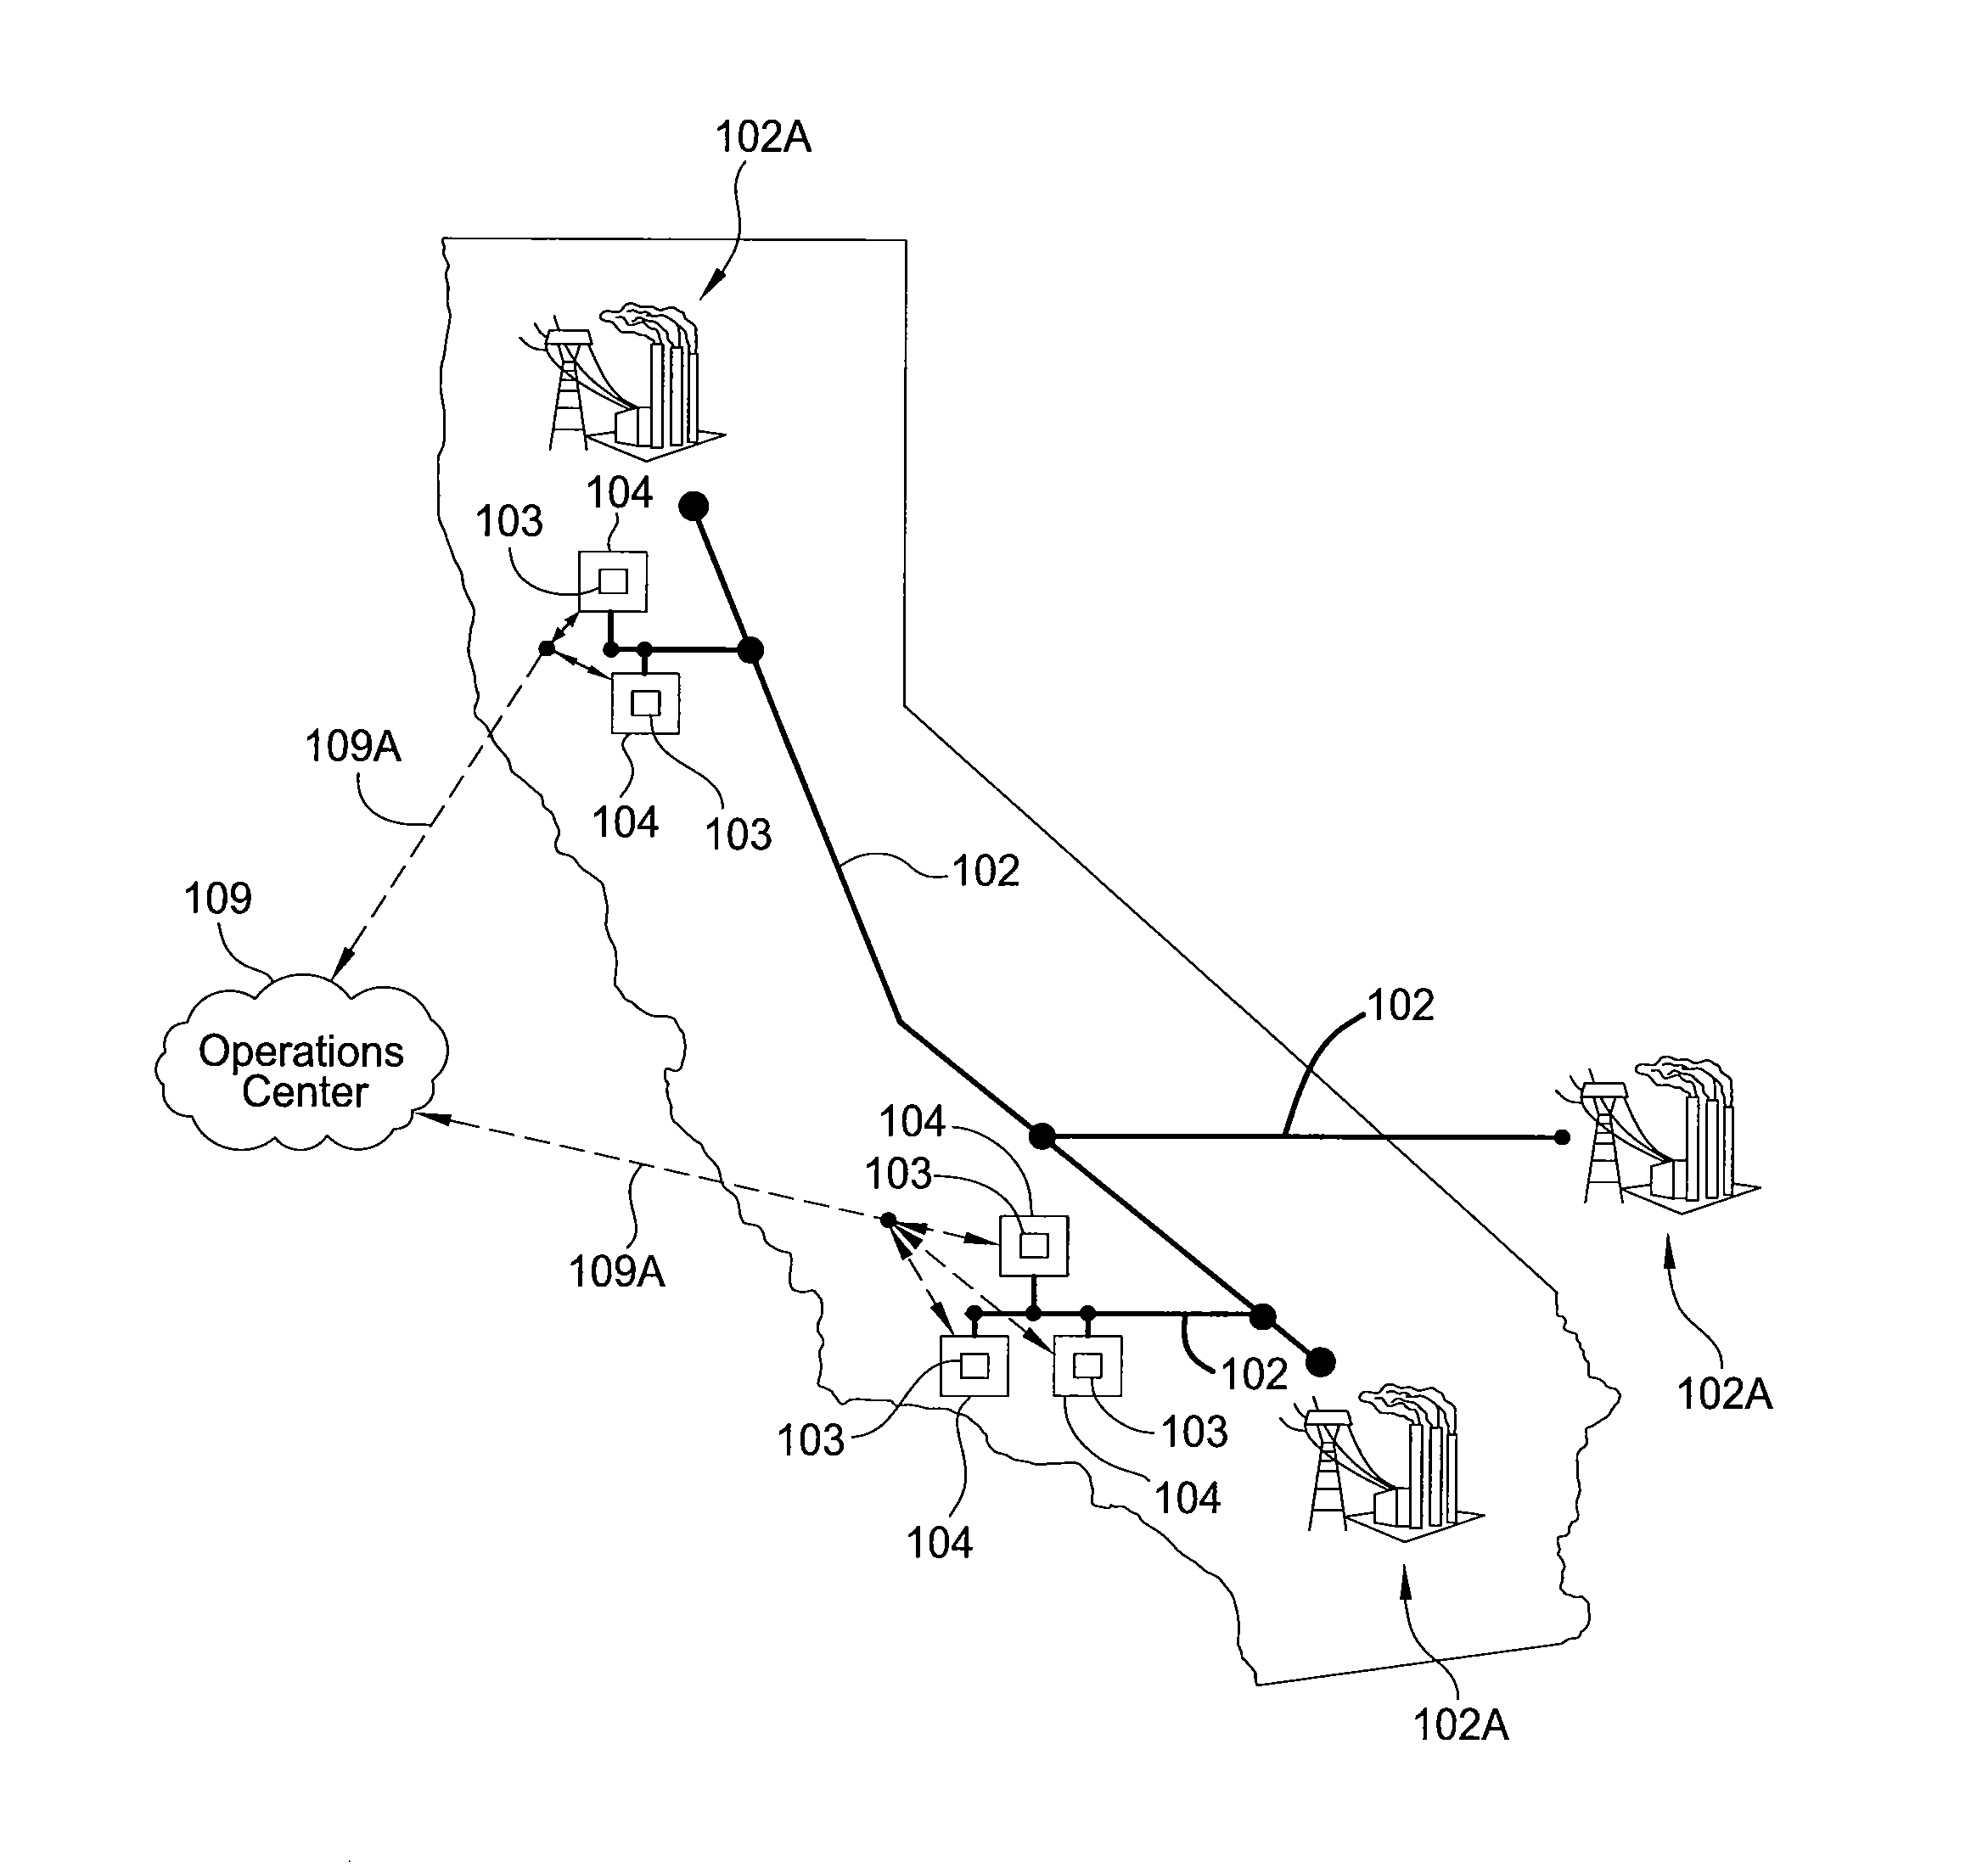 Method and apparatus for damping power oscillations on an electrical grid using networked distributed energy storage systems